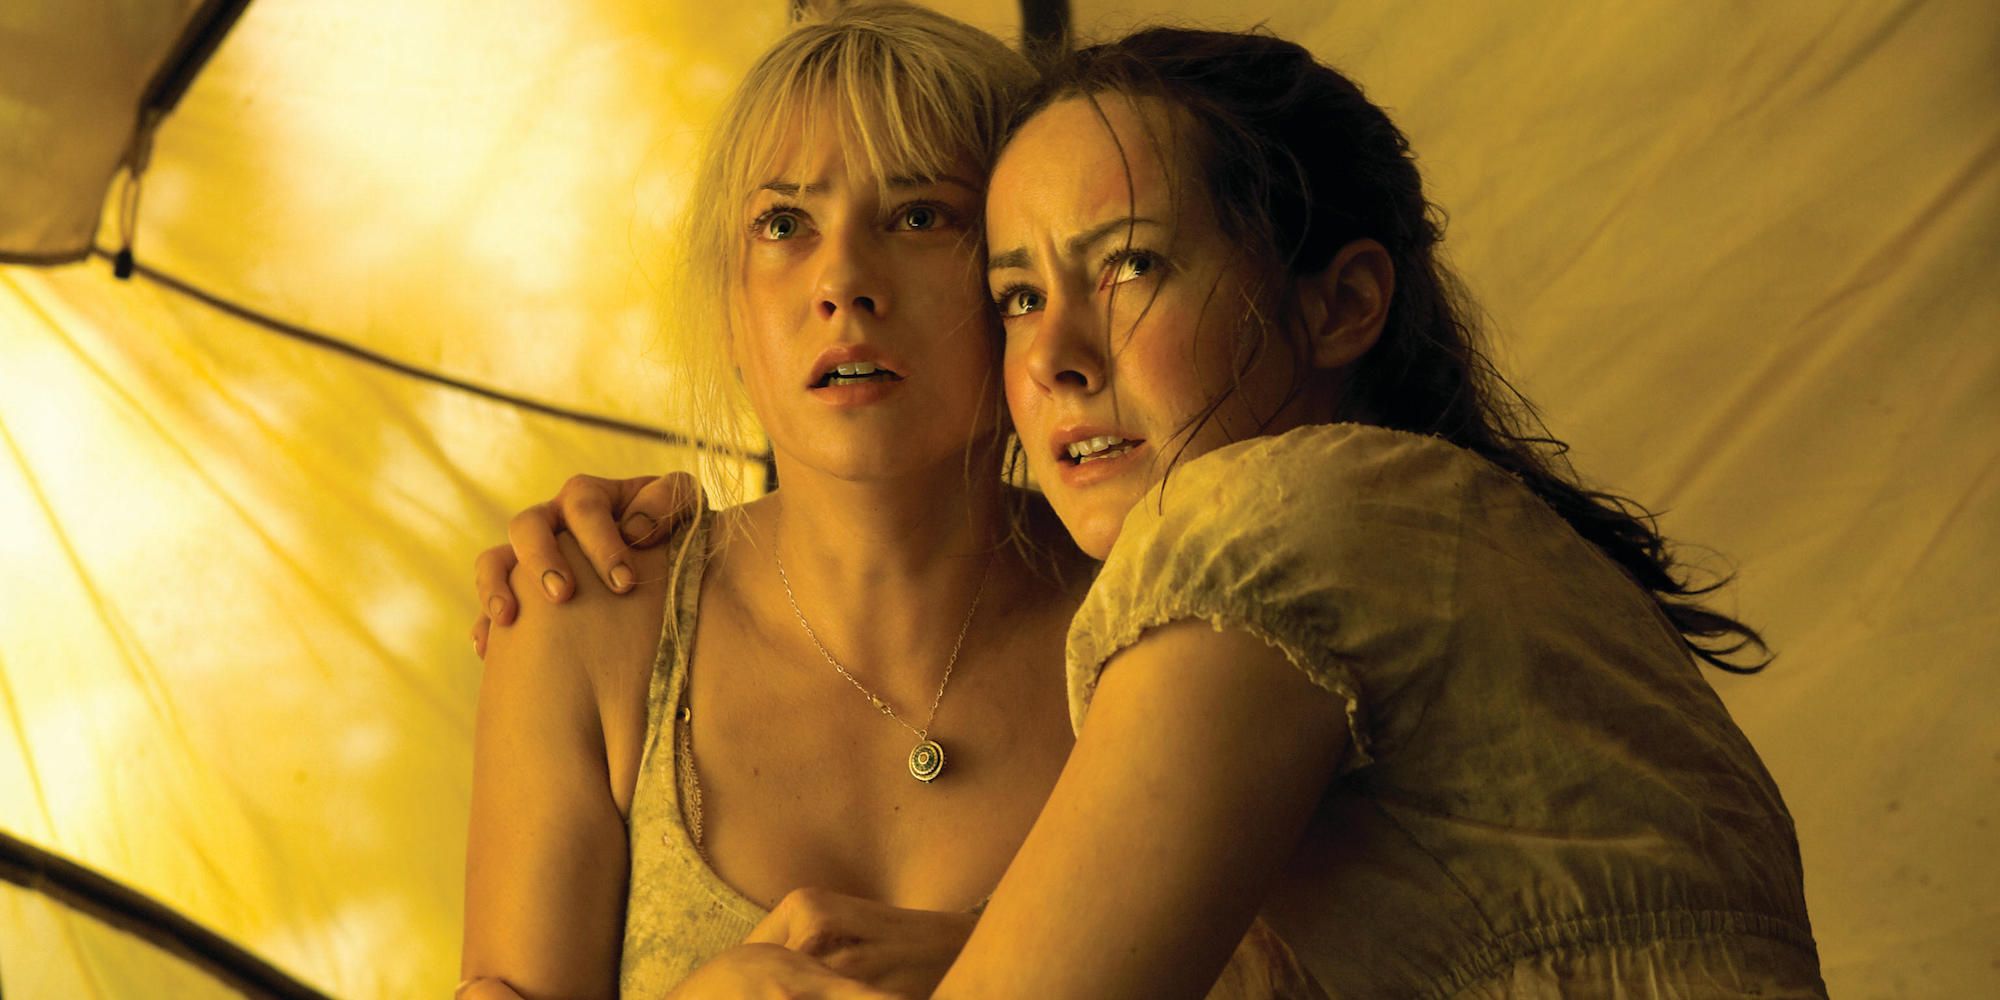 Jenna Malone and Laura Ramsey in The Ruins